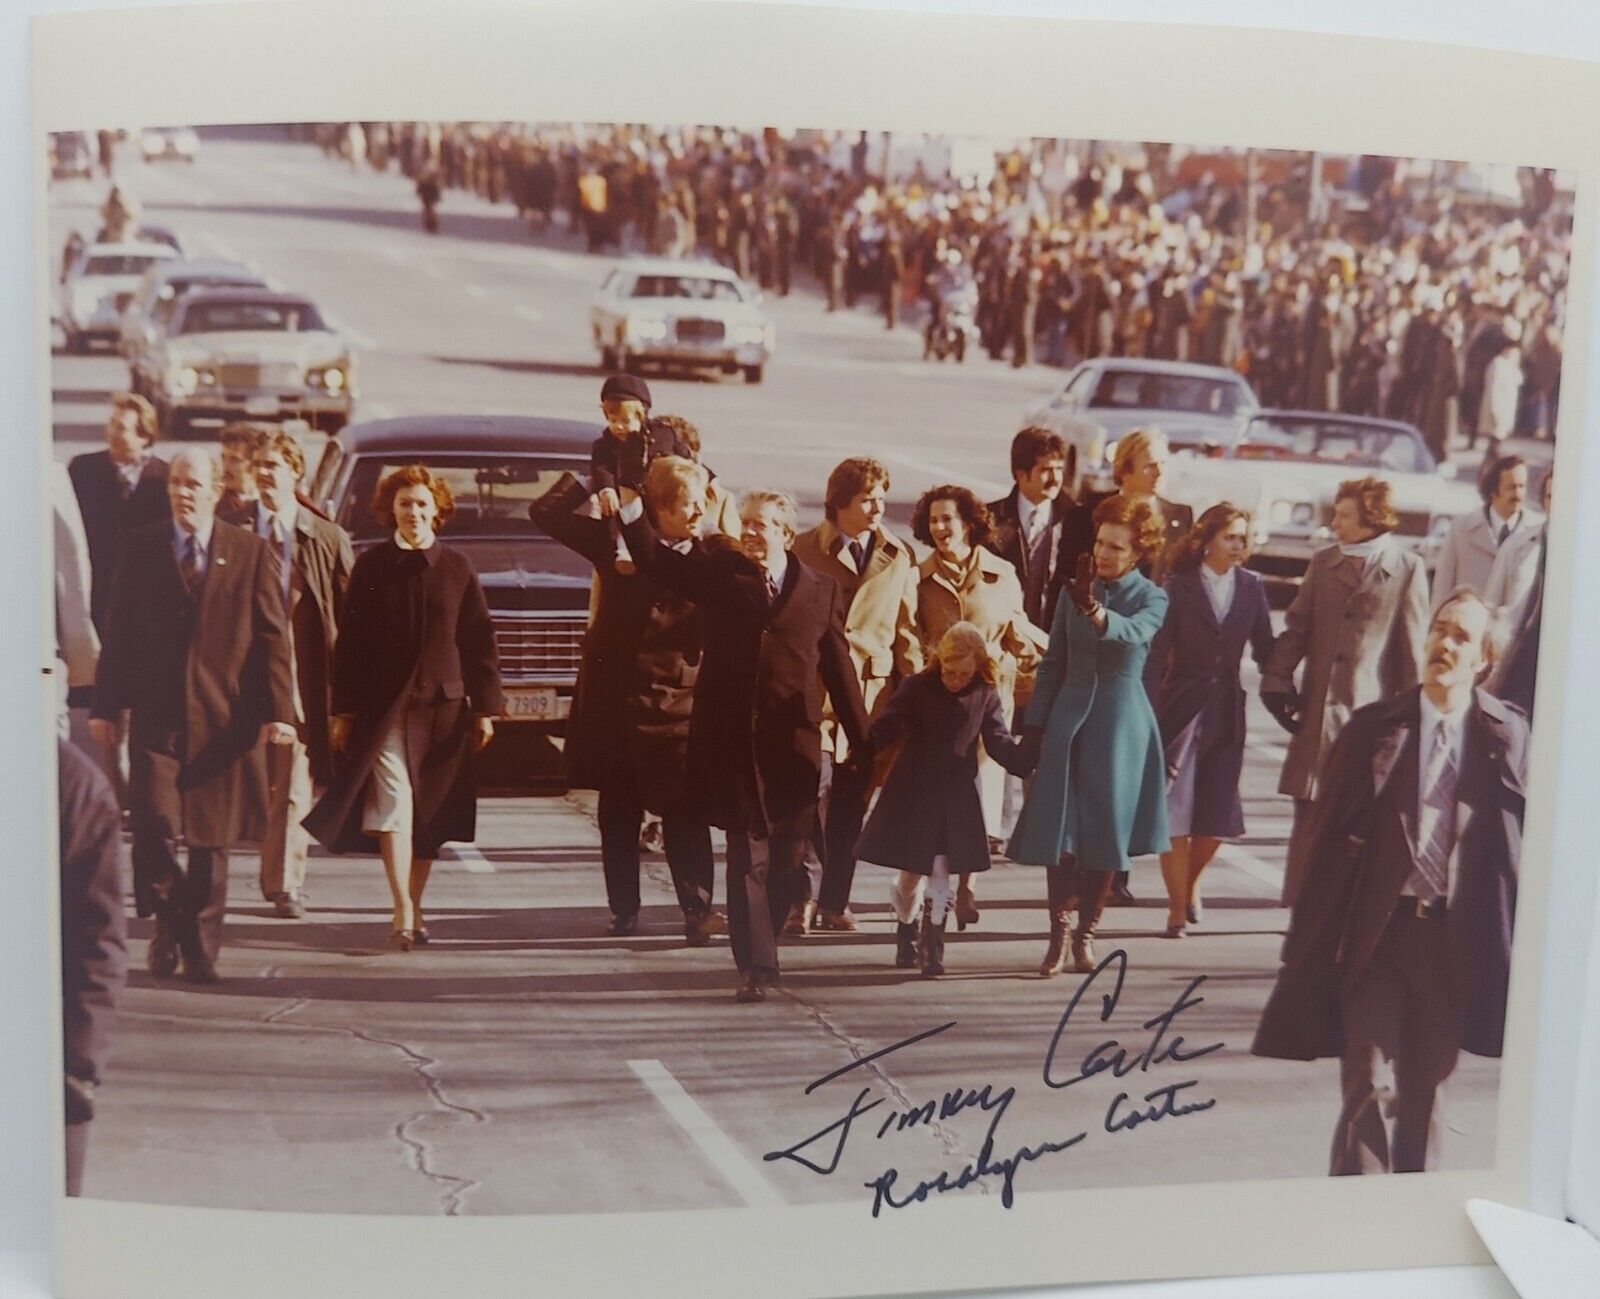 President Jimmy Carter & First Lady Rosalynn Carter Inaugural Signed Photo 